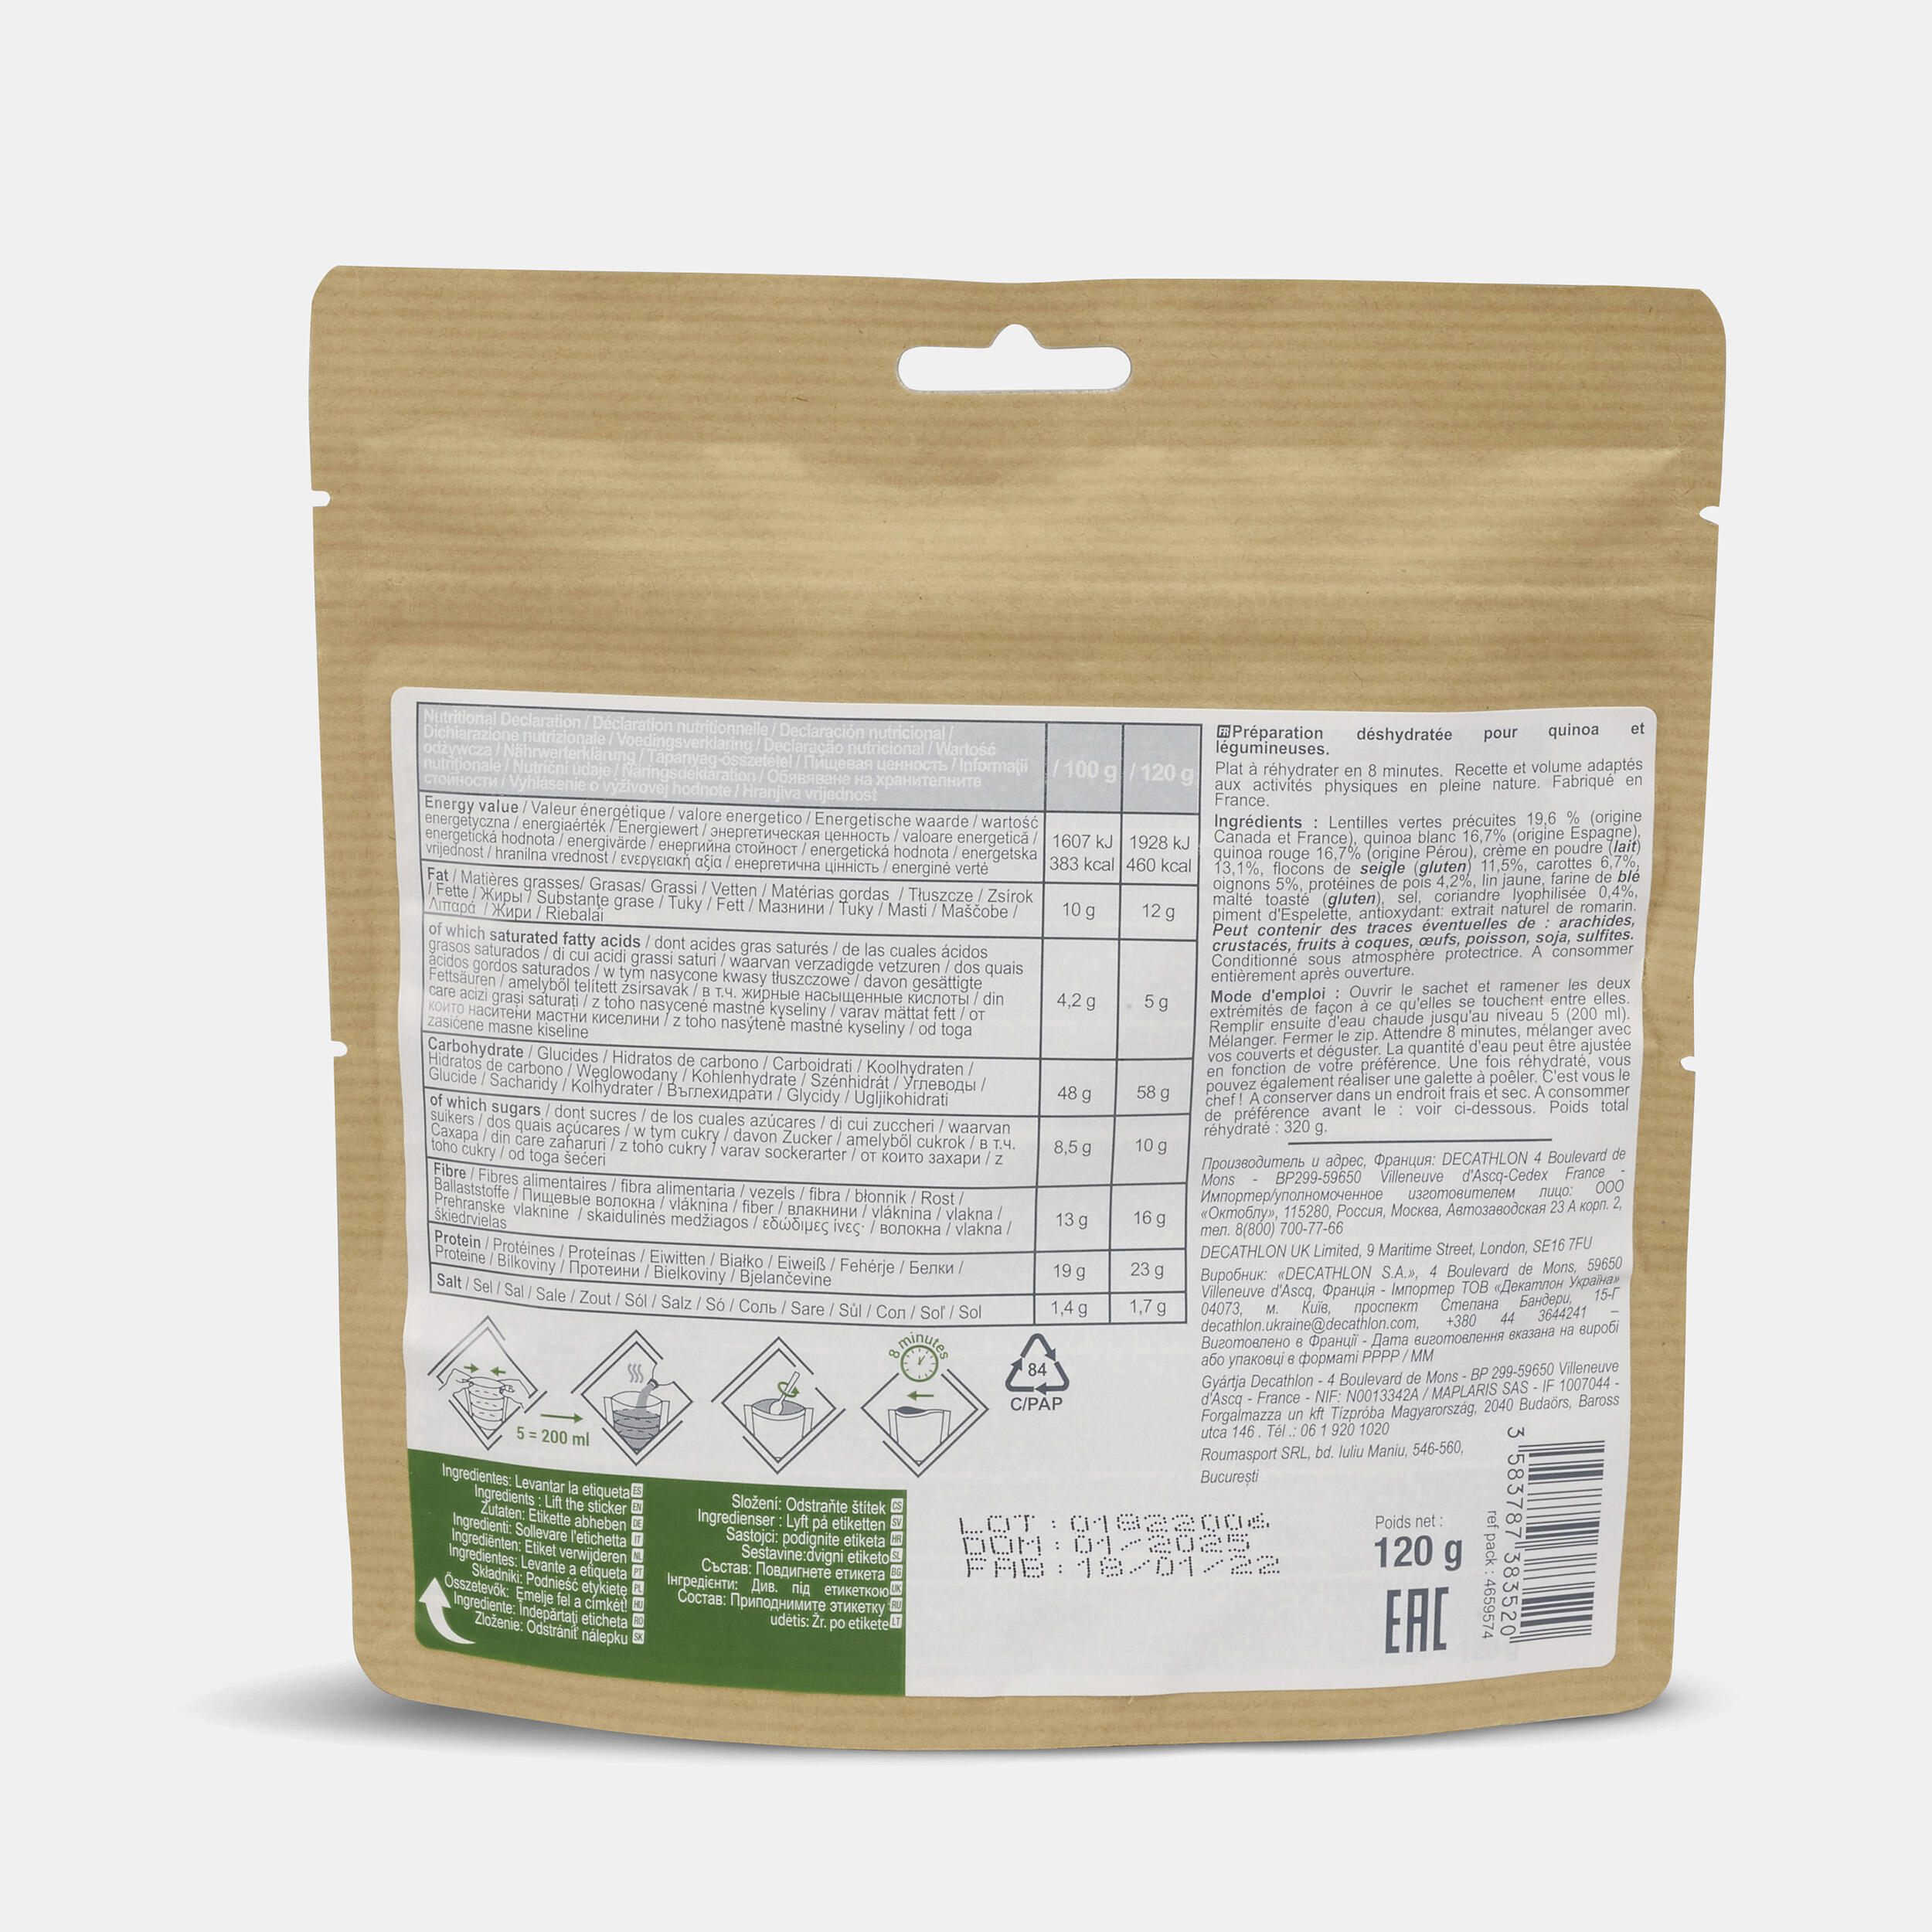 Vegetarian Dehydrated Meal - Vegetable Quinoa Duo - 120 g 2/3